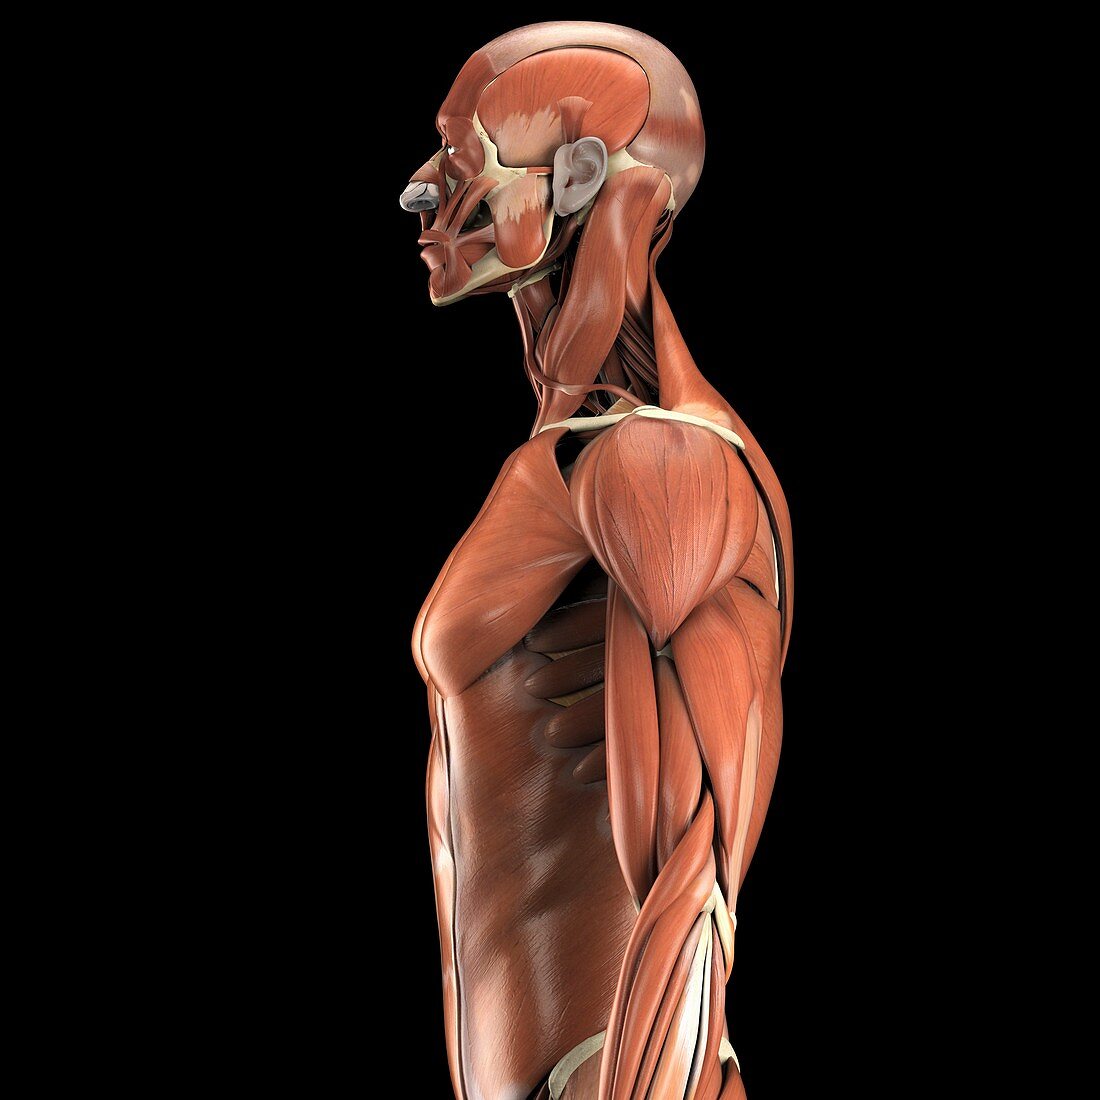 The Muscles of the Upper Body, artwork